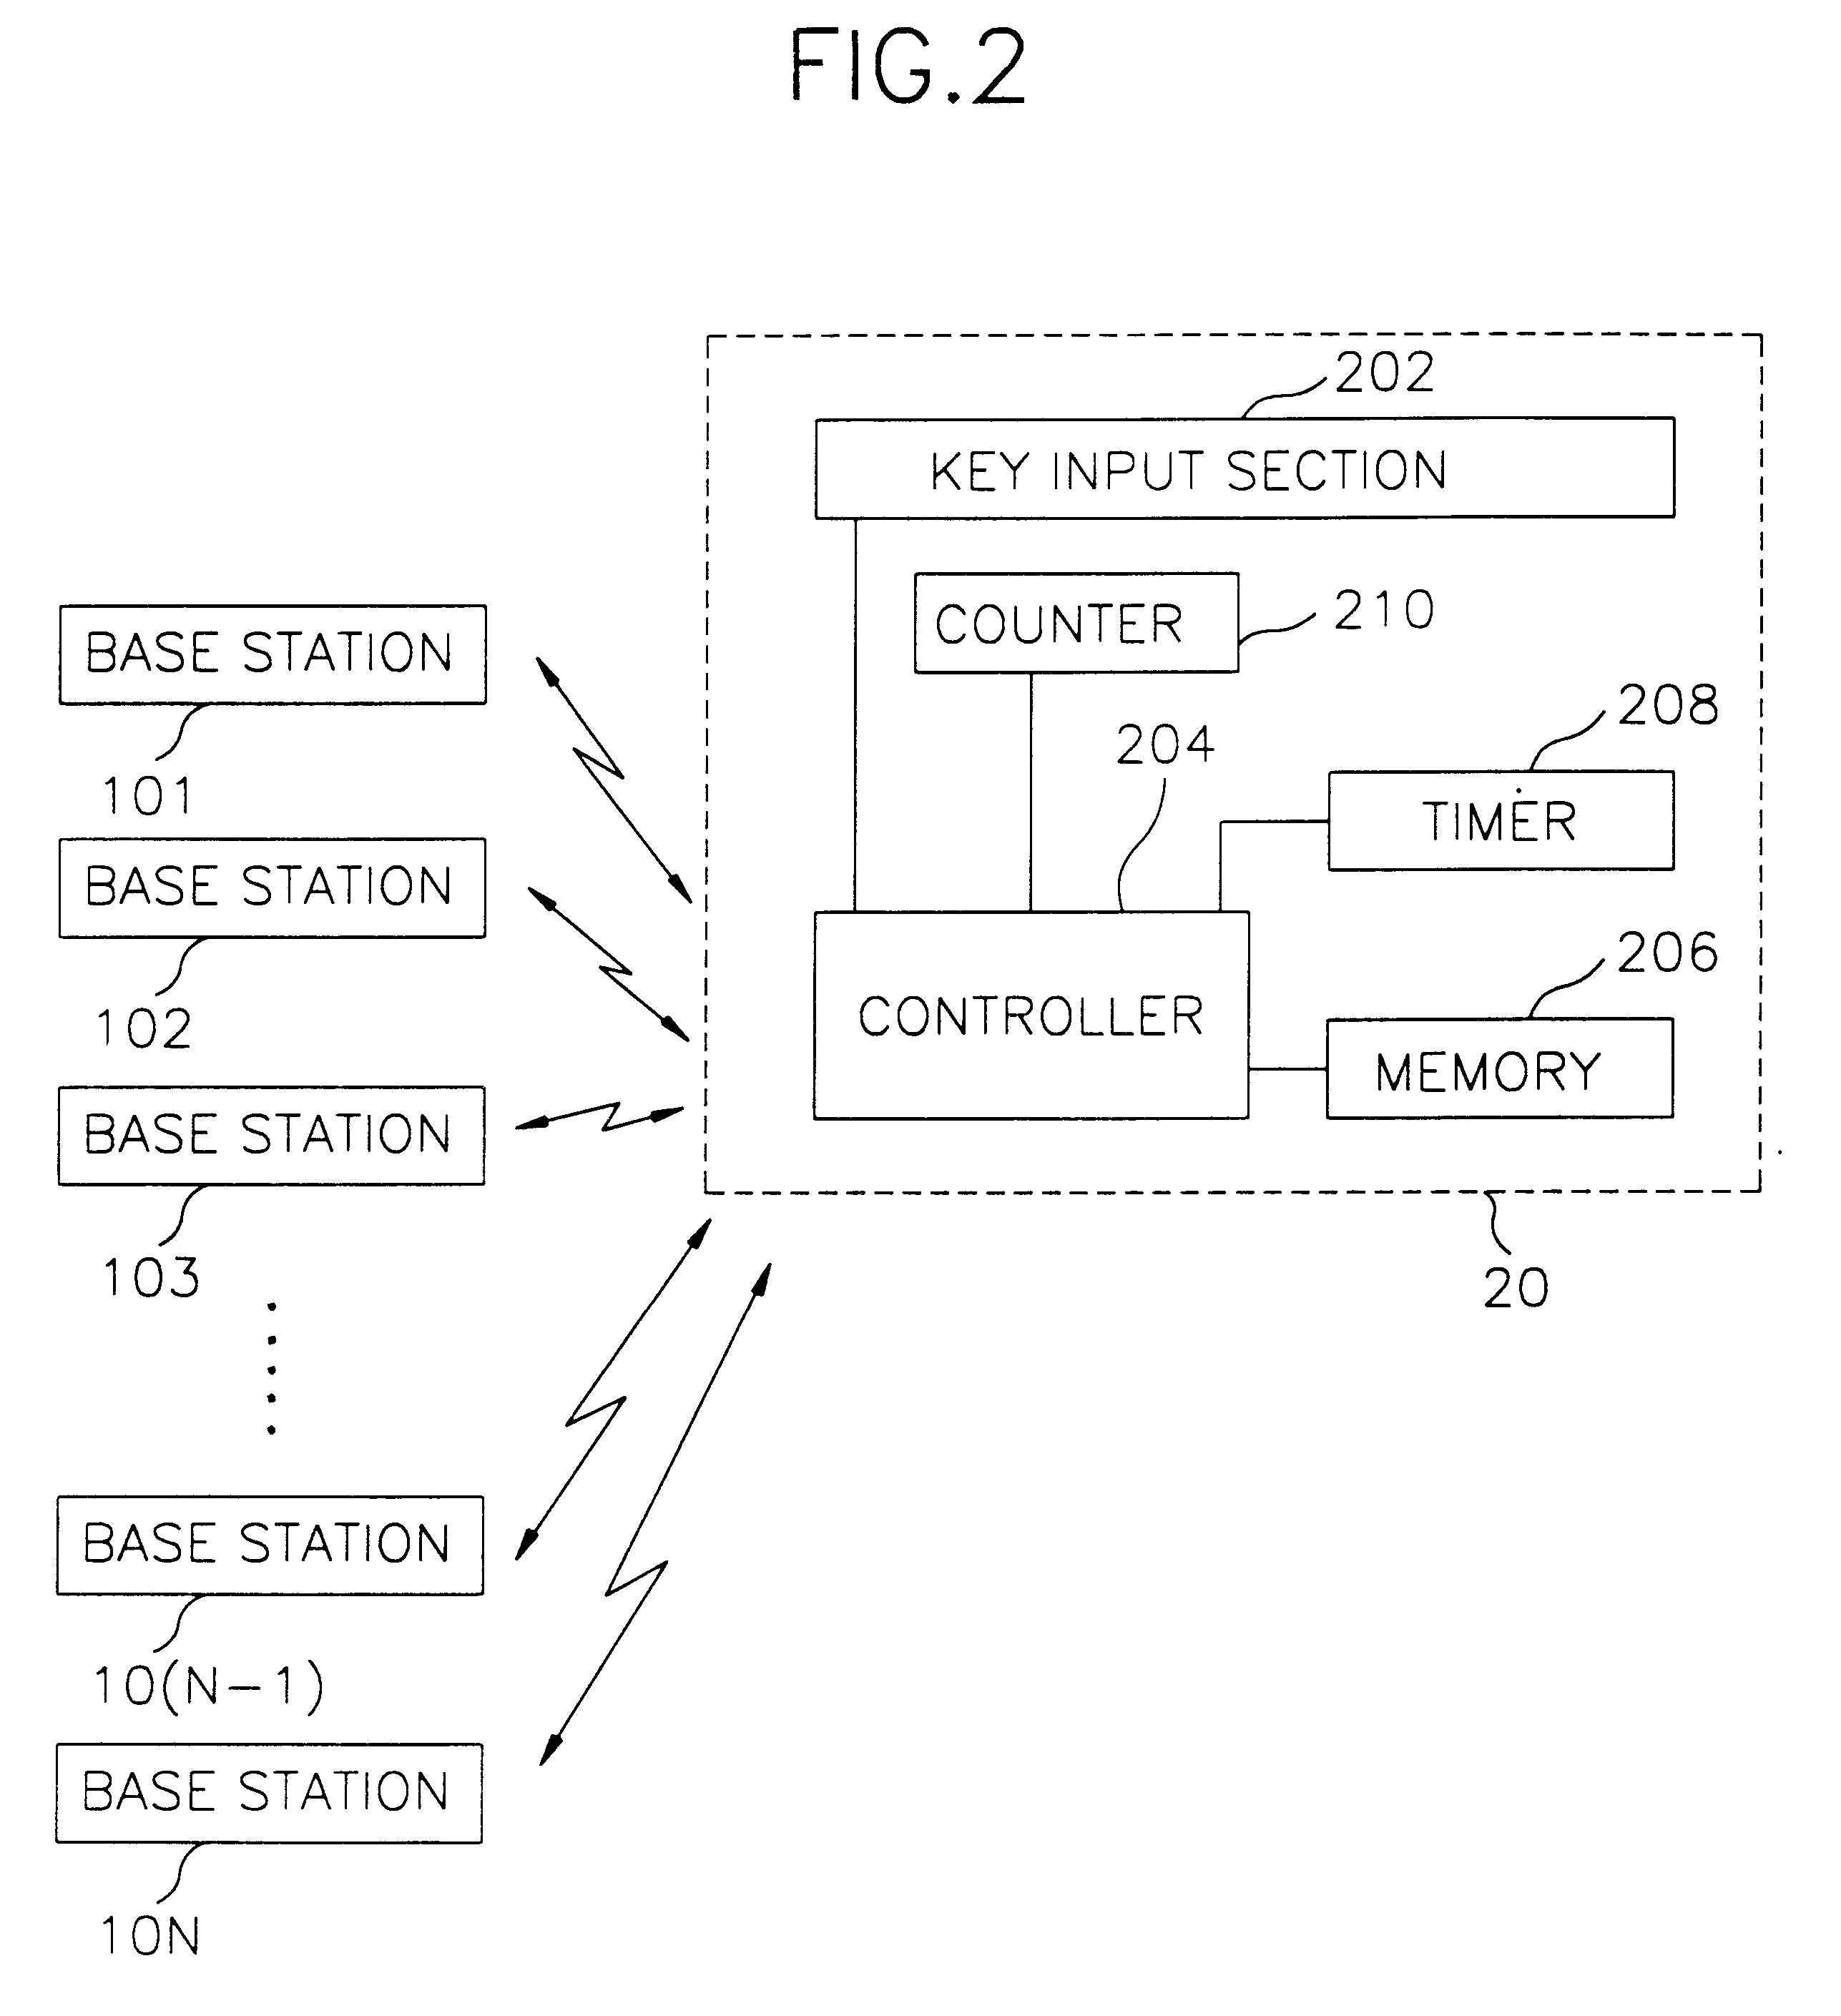 Idle handoff controlling method in cellular communication system